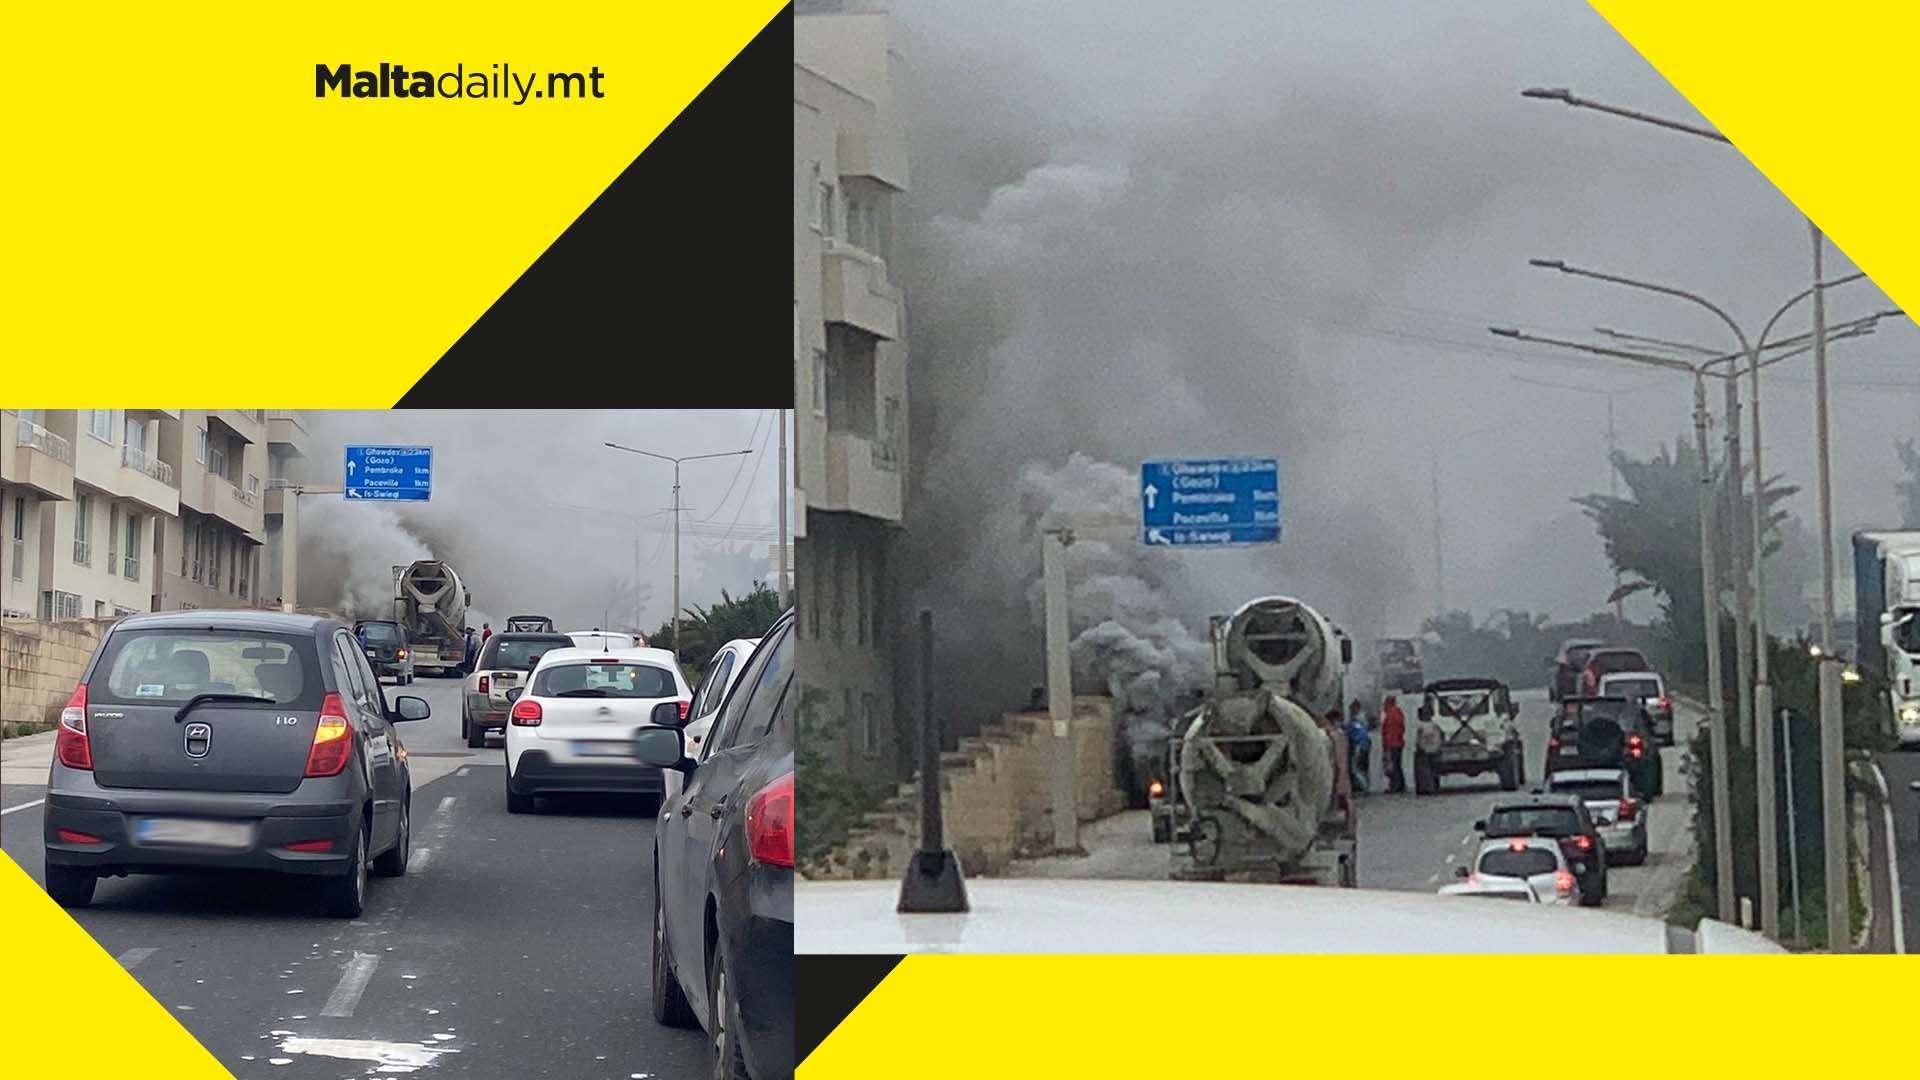 Clouds of smoke in Regional Road after cement mixer truck malfunctions